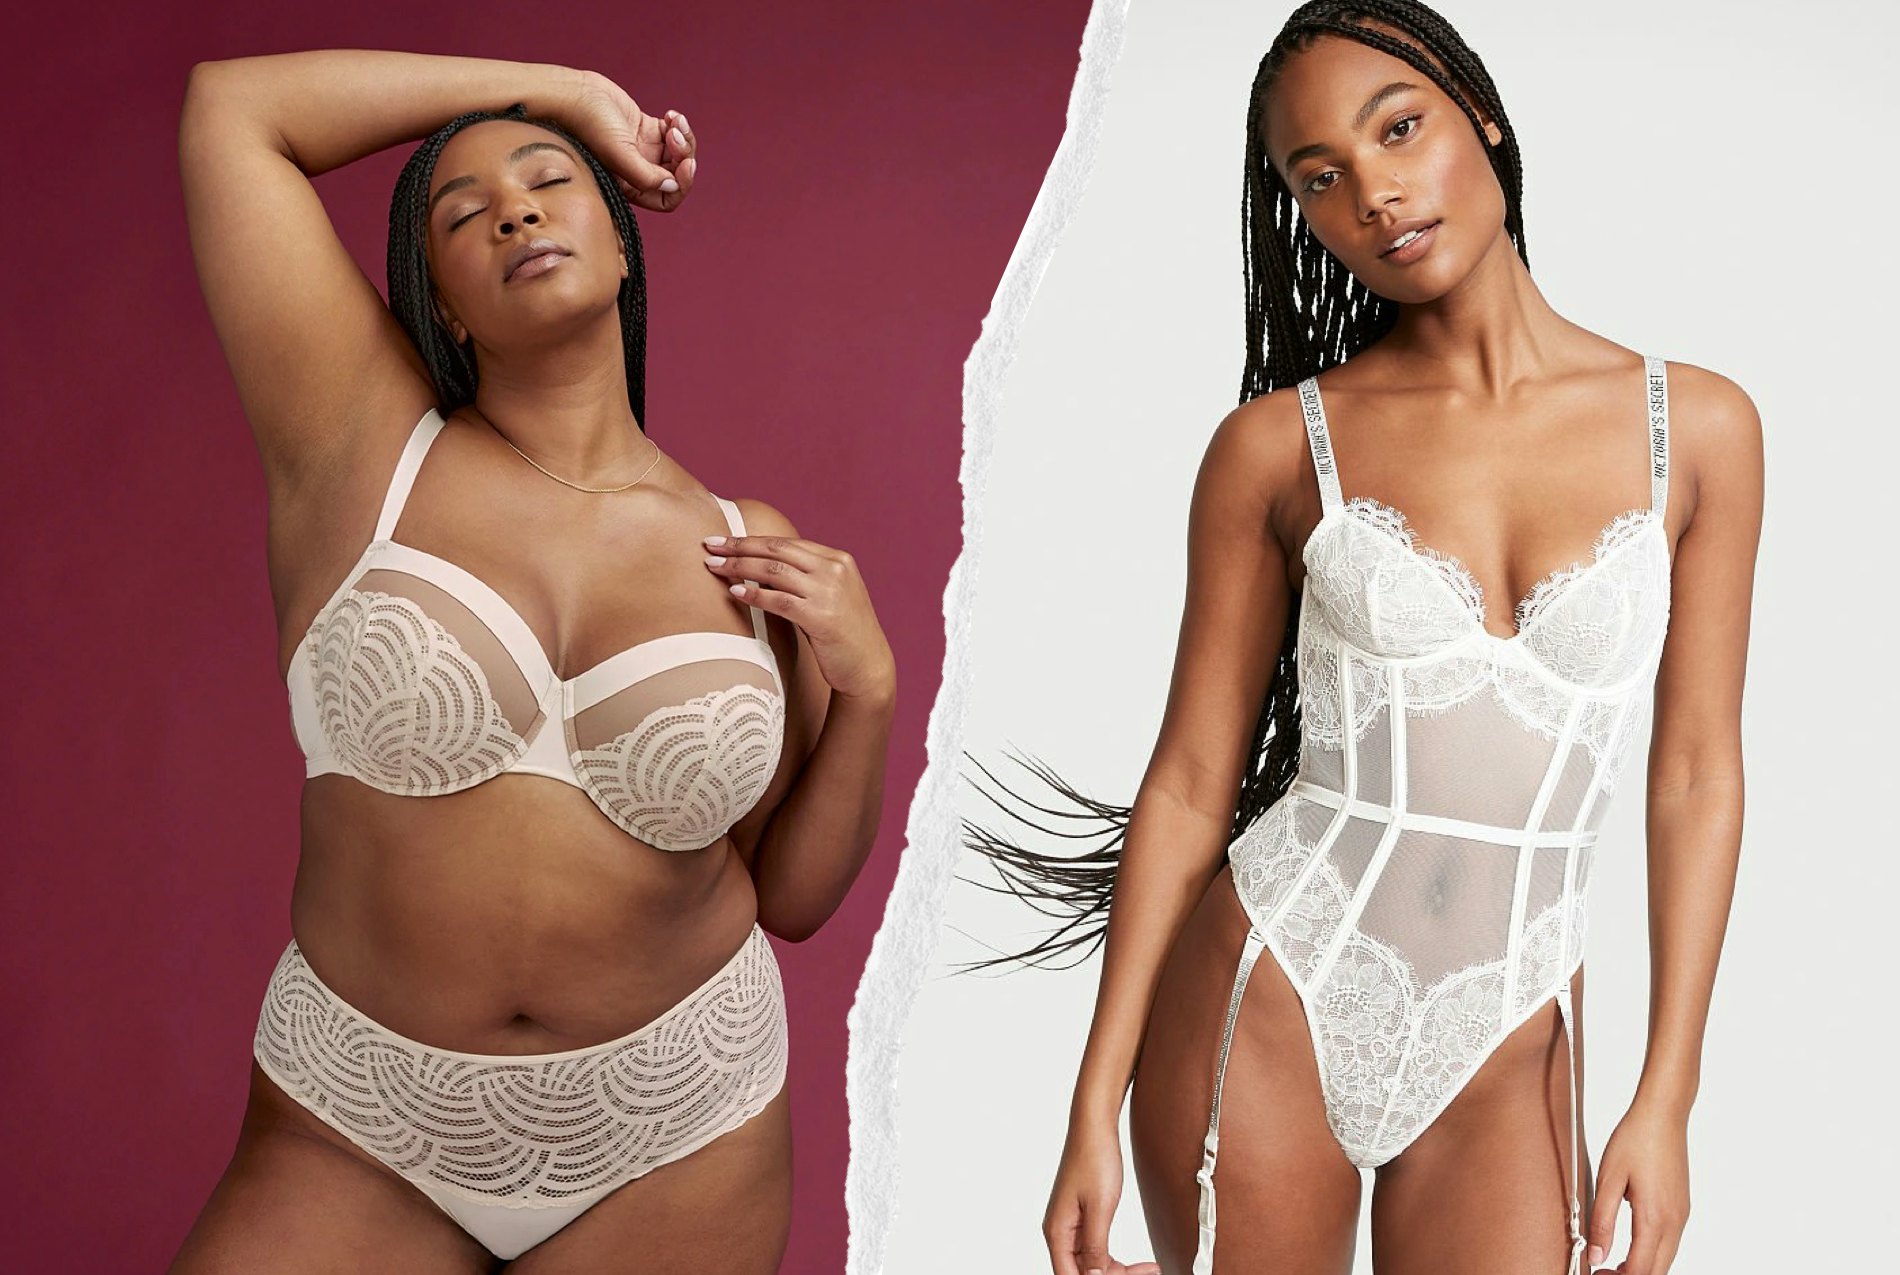 This Bridal Lingerie Will Make You Look and Feel Sexy on Your